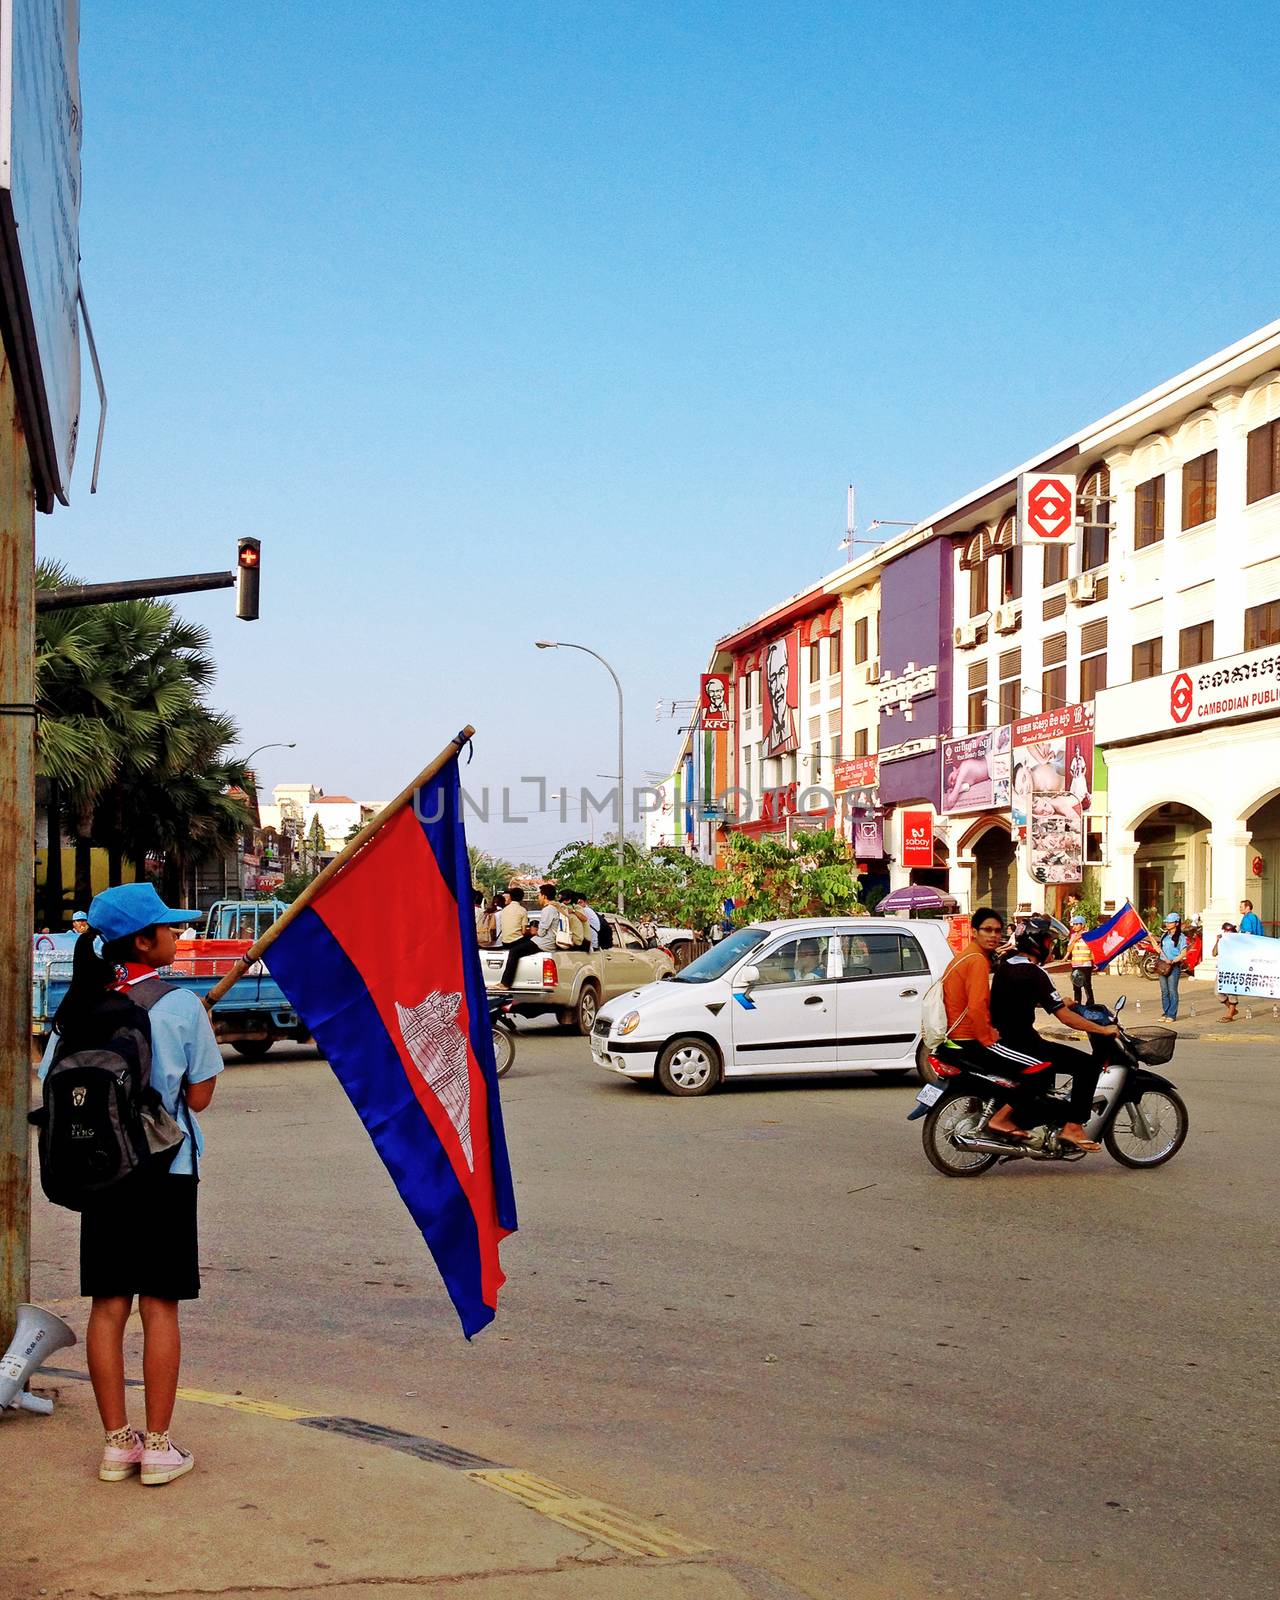  SIEM REAP, CAMBODIA - December 22, 2013 : Cambodian student with national flag at city street in Siem Reap, Cambodia